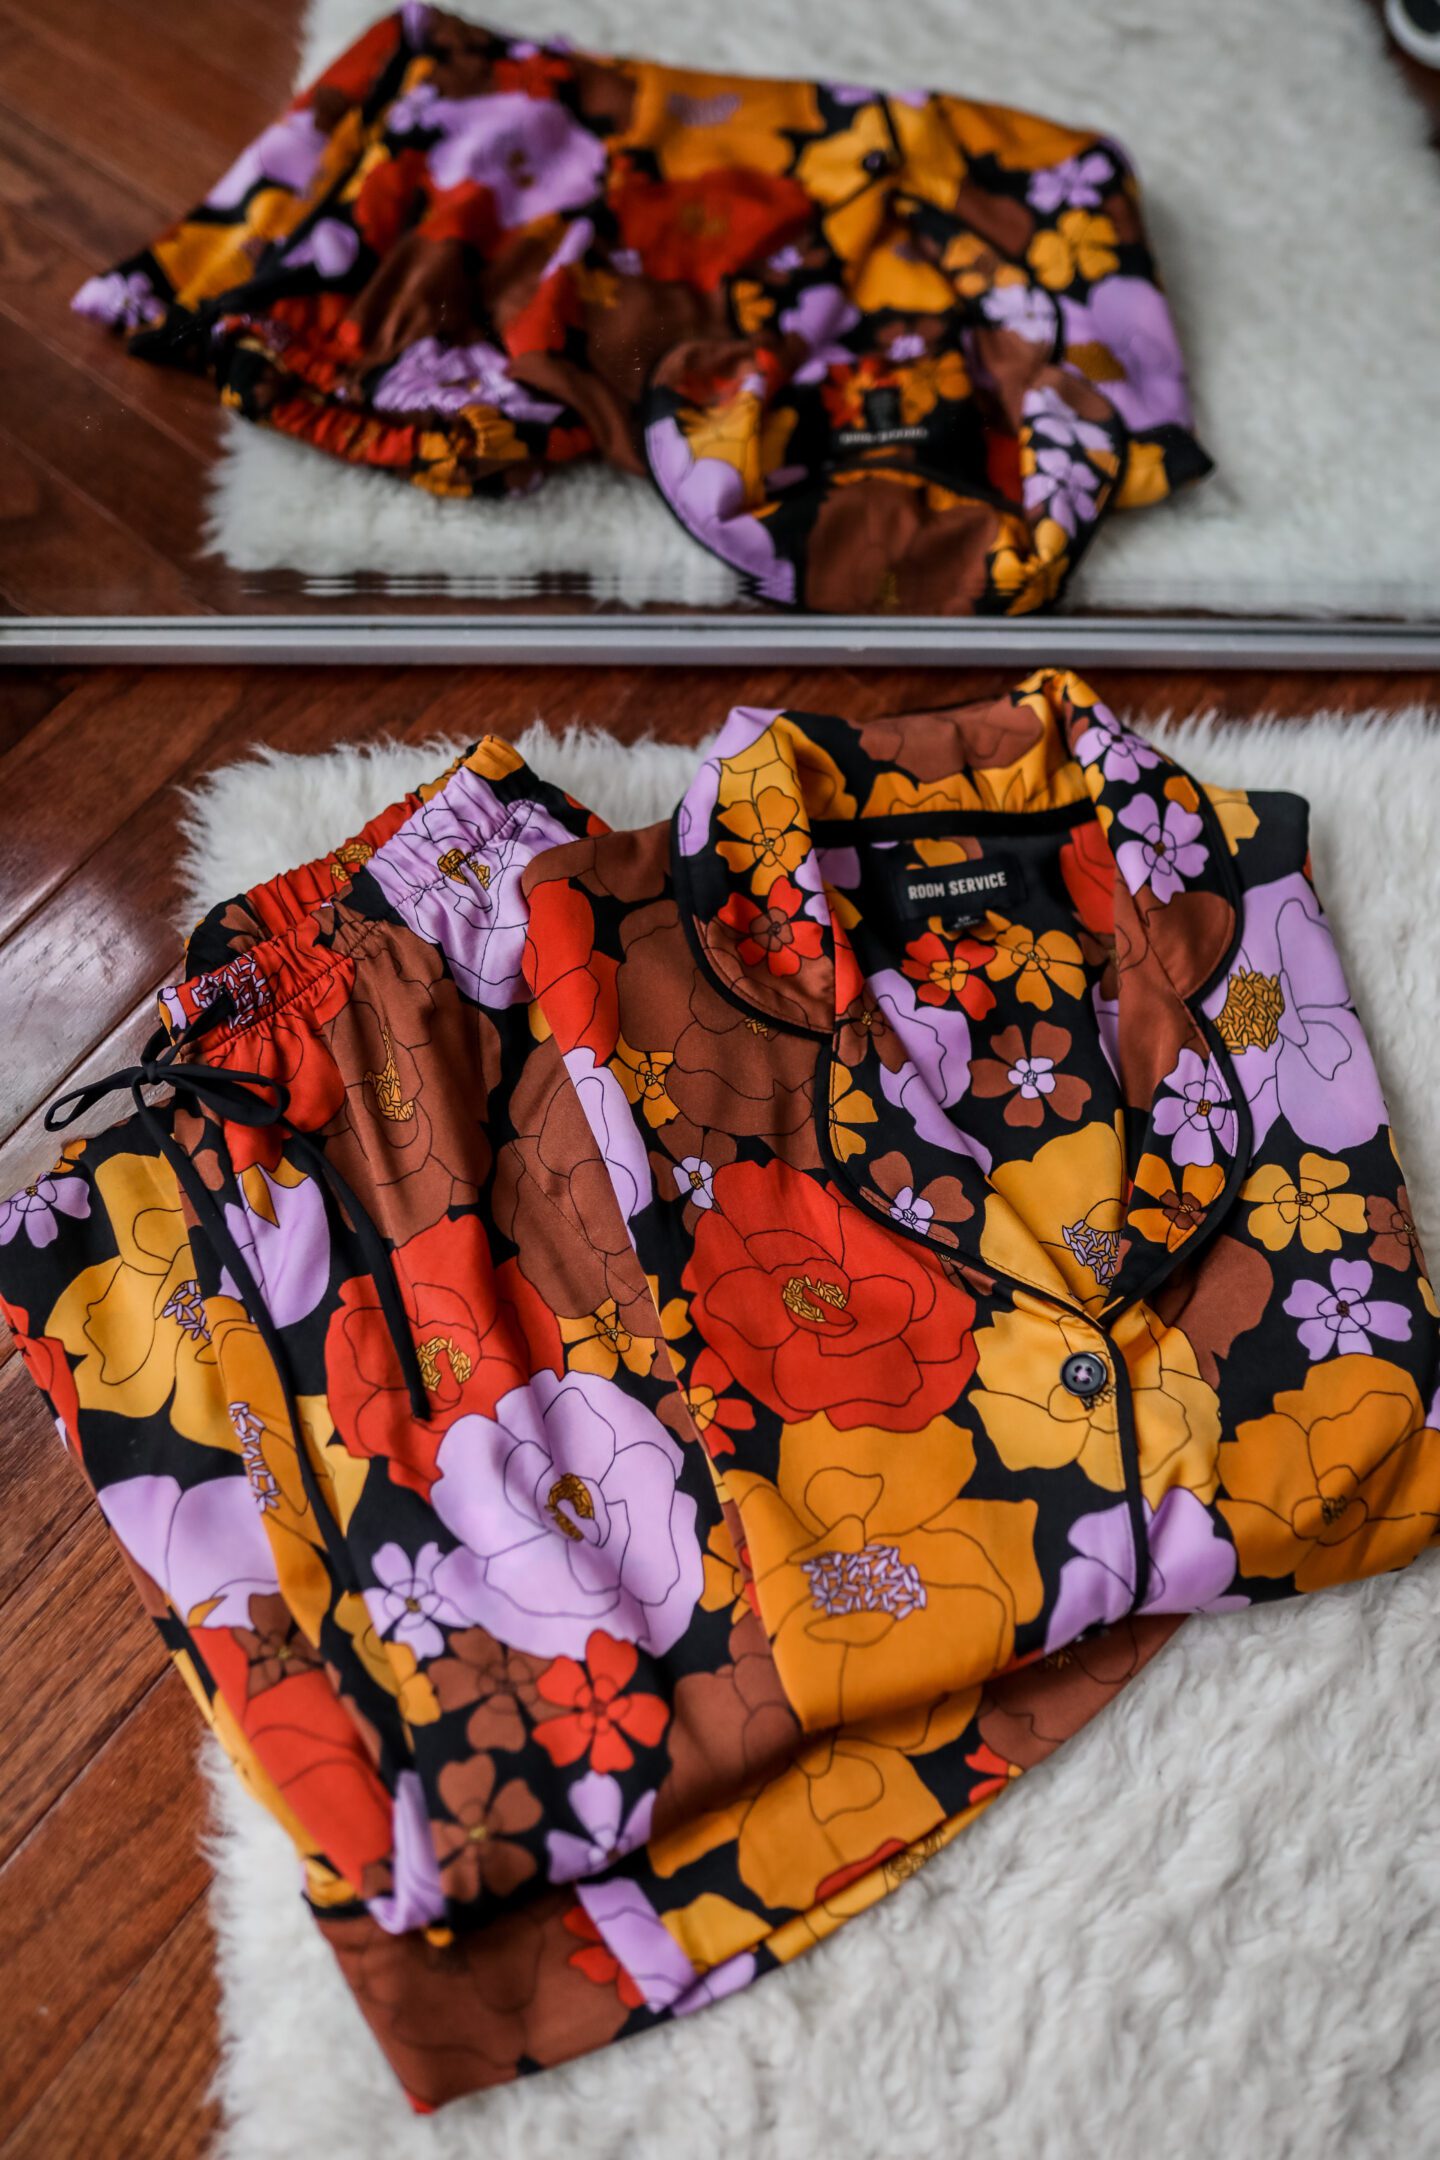 Room Service jammies - Monthly Favorites on Coming Up Roses